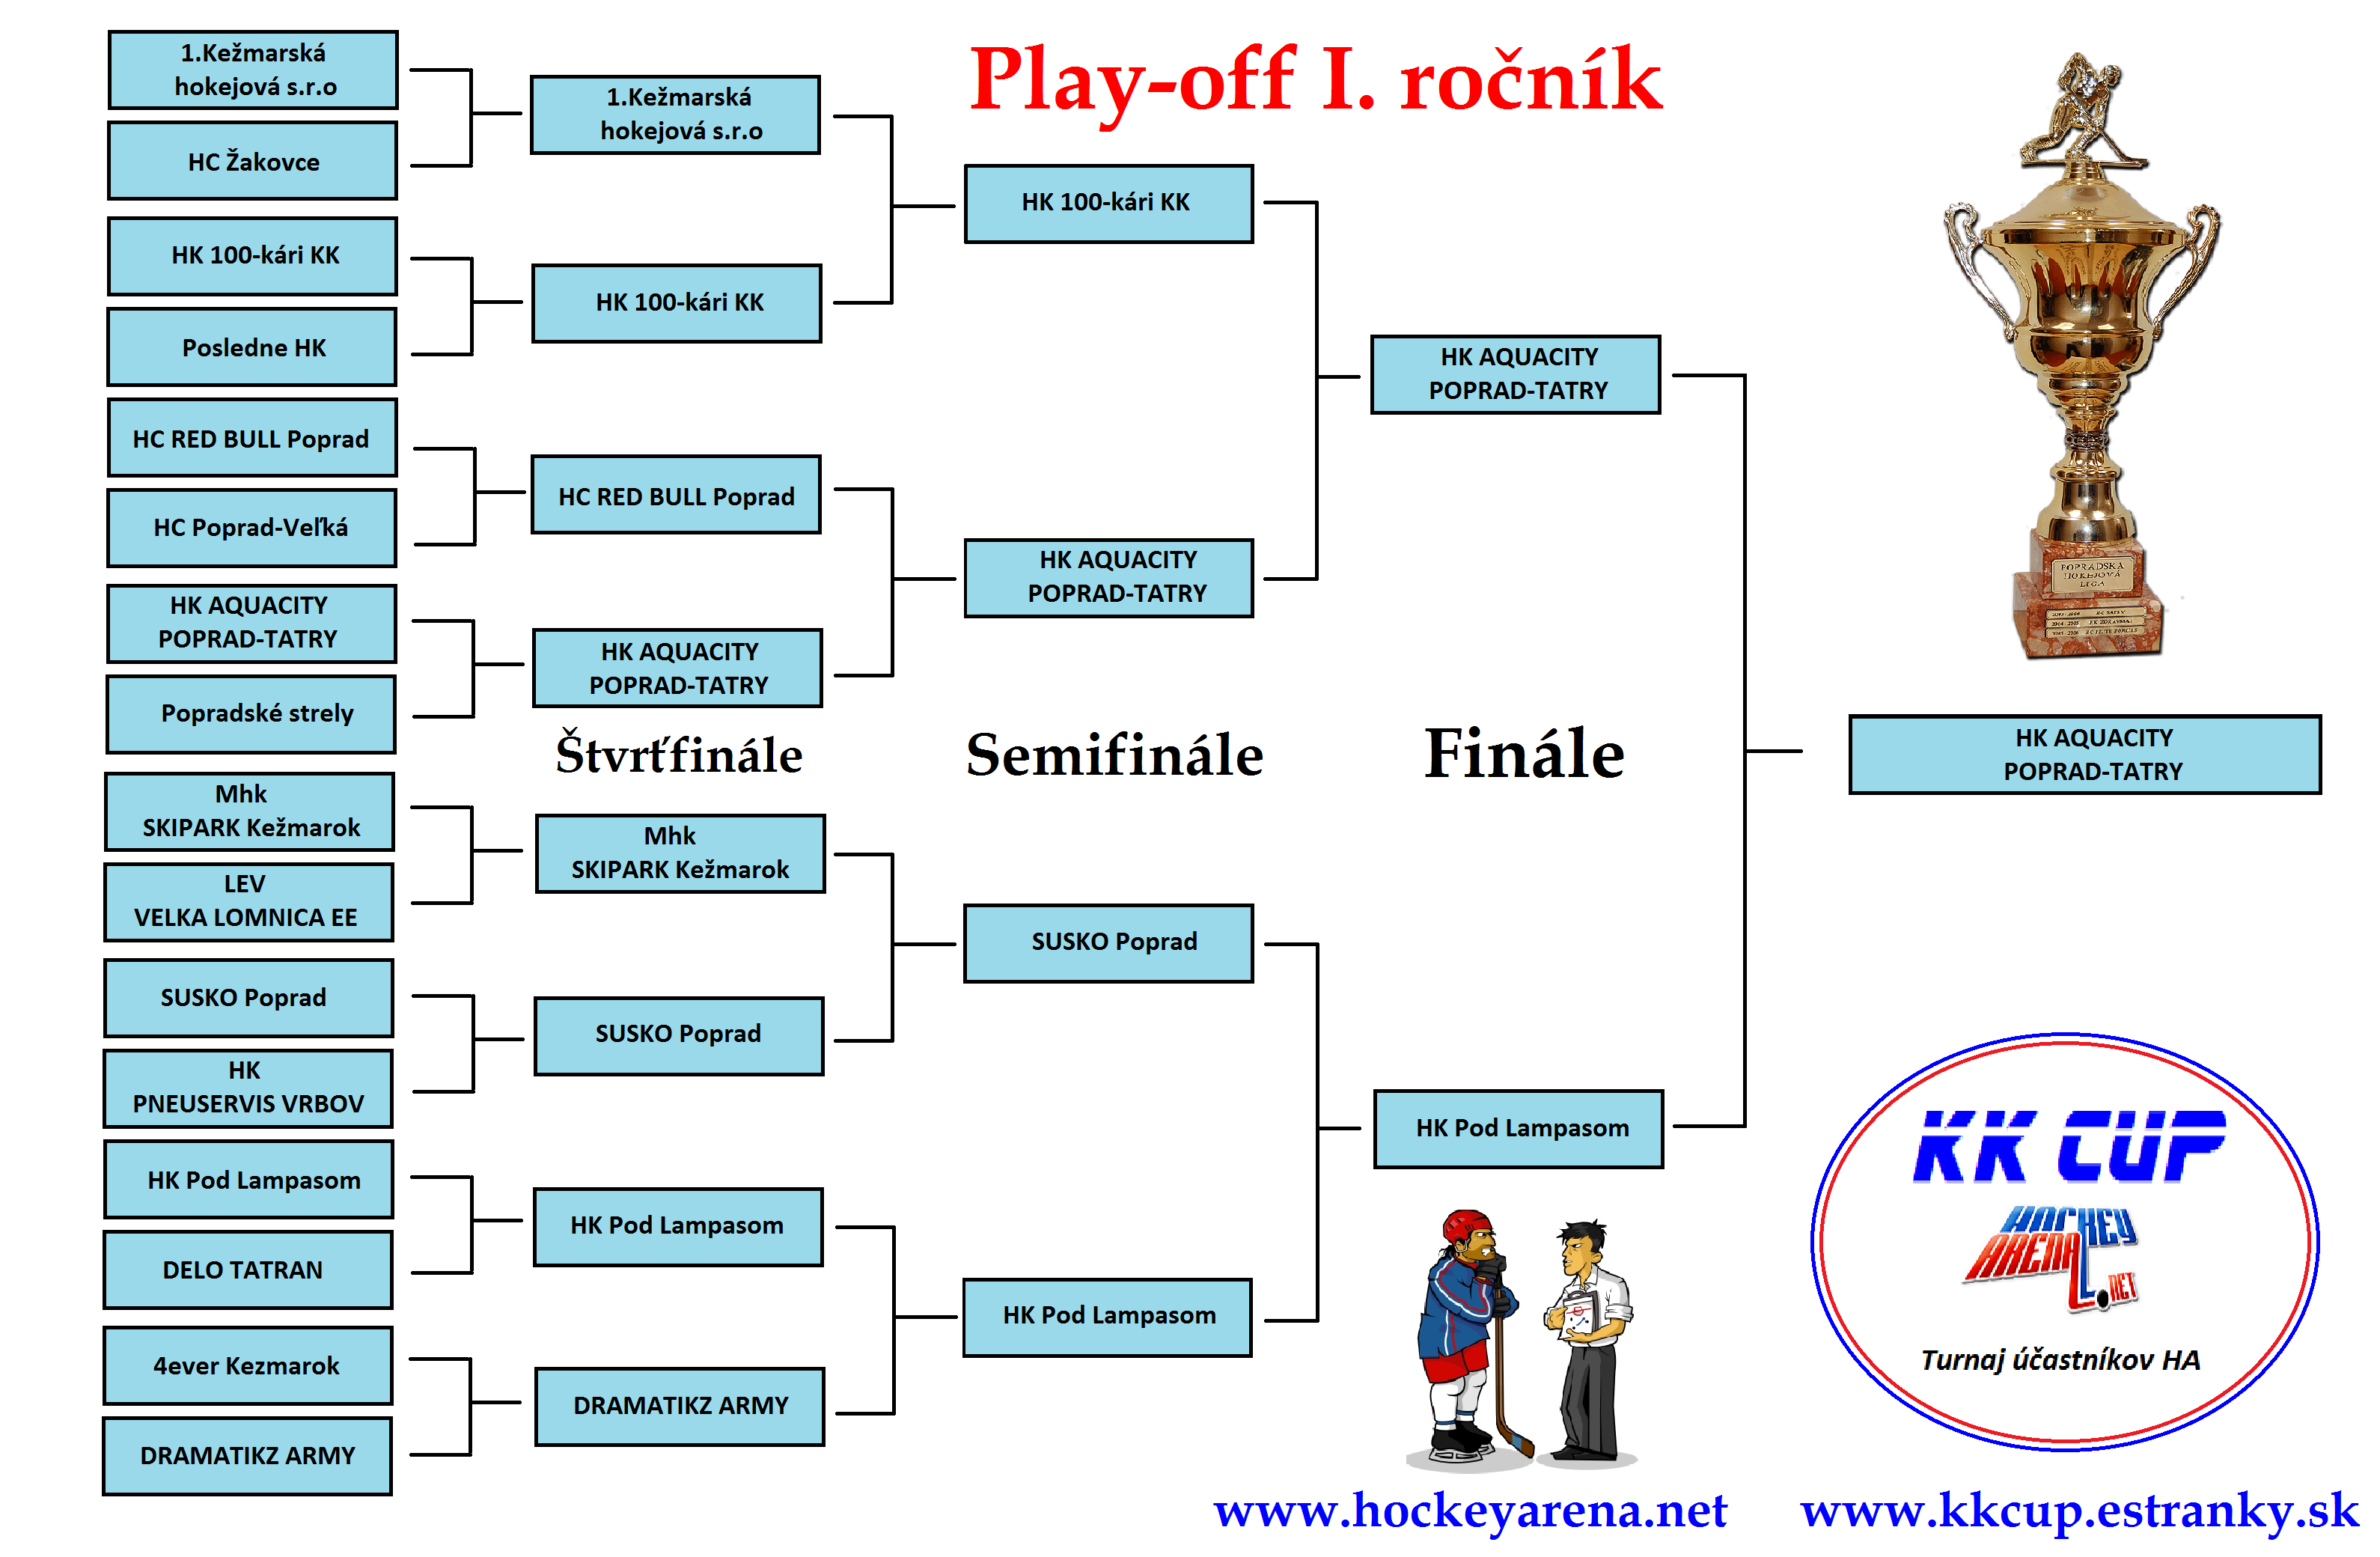 Play-off